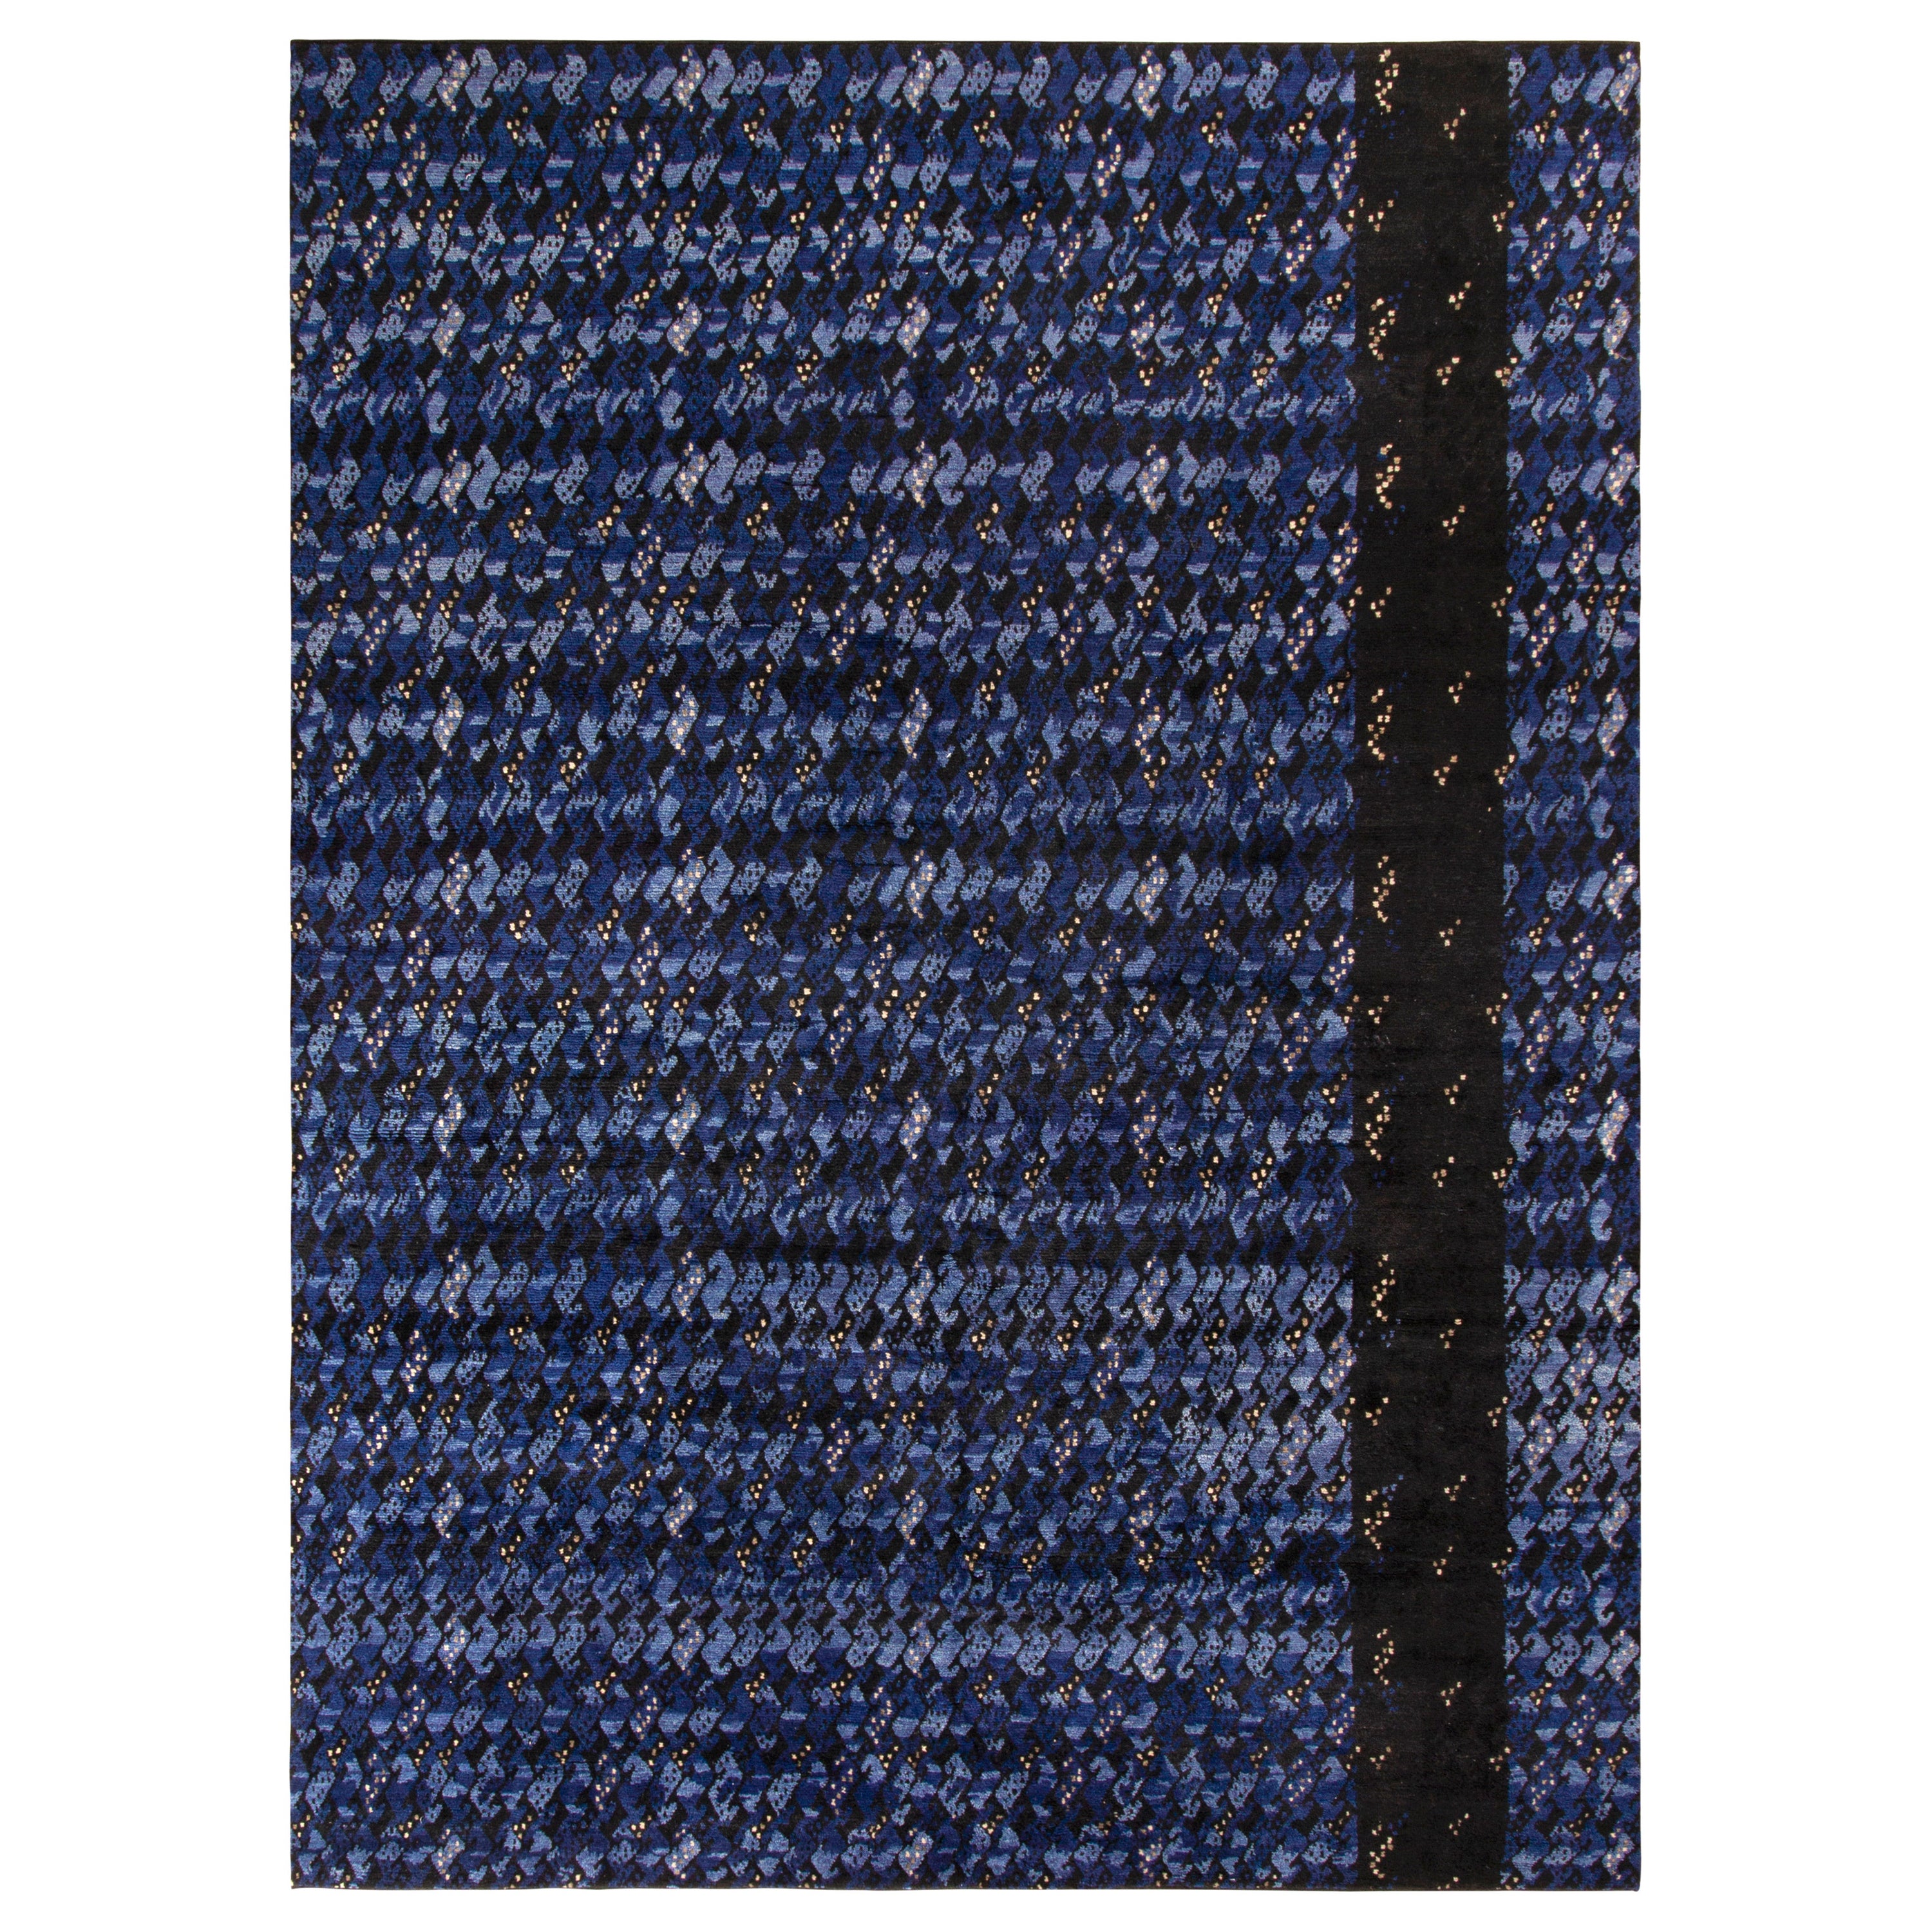 Rug & Kilim’s Scandinavian Style Rug in All over Blue, Black Geometric Pattern For Sale